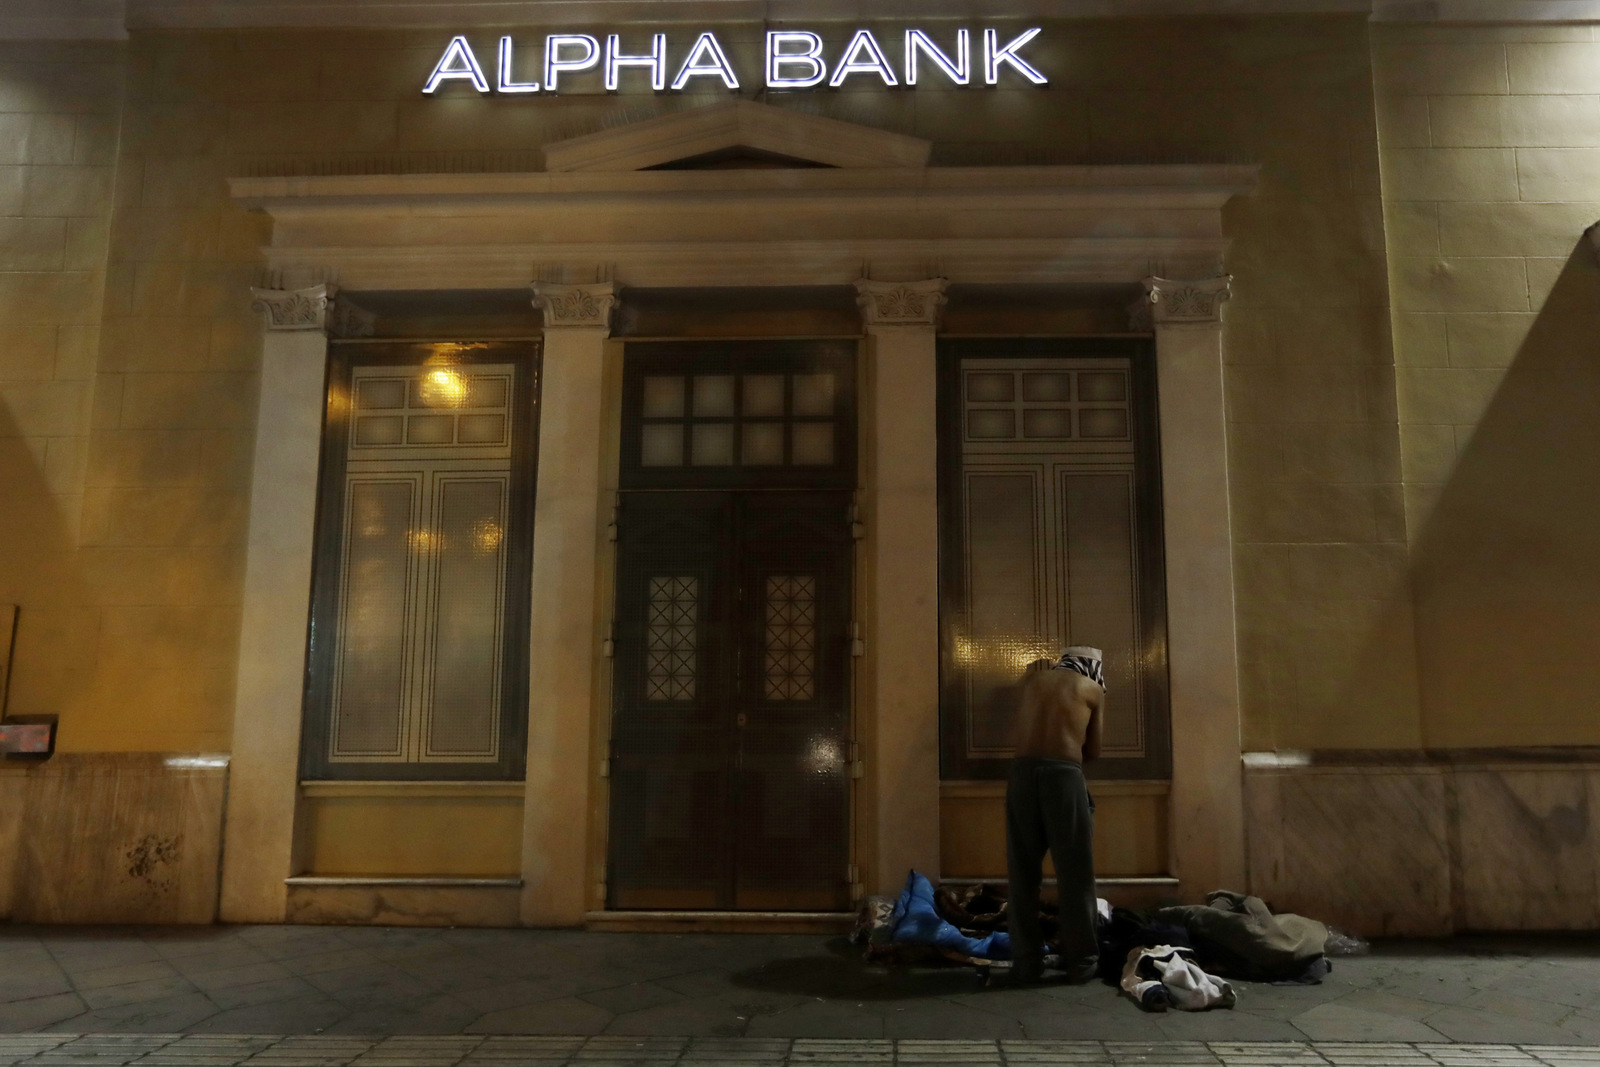 A homeless person changes clothes outside a bank in central Athens. Nearly one-in-four Greeks are unemployed and receive no benefits. Poverty rates have surged here since the start of the crisis in late 2009, with nearly 36 percent of the country living in financial distress. (AP/Thanassis Stavrakis)